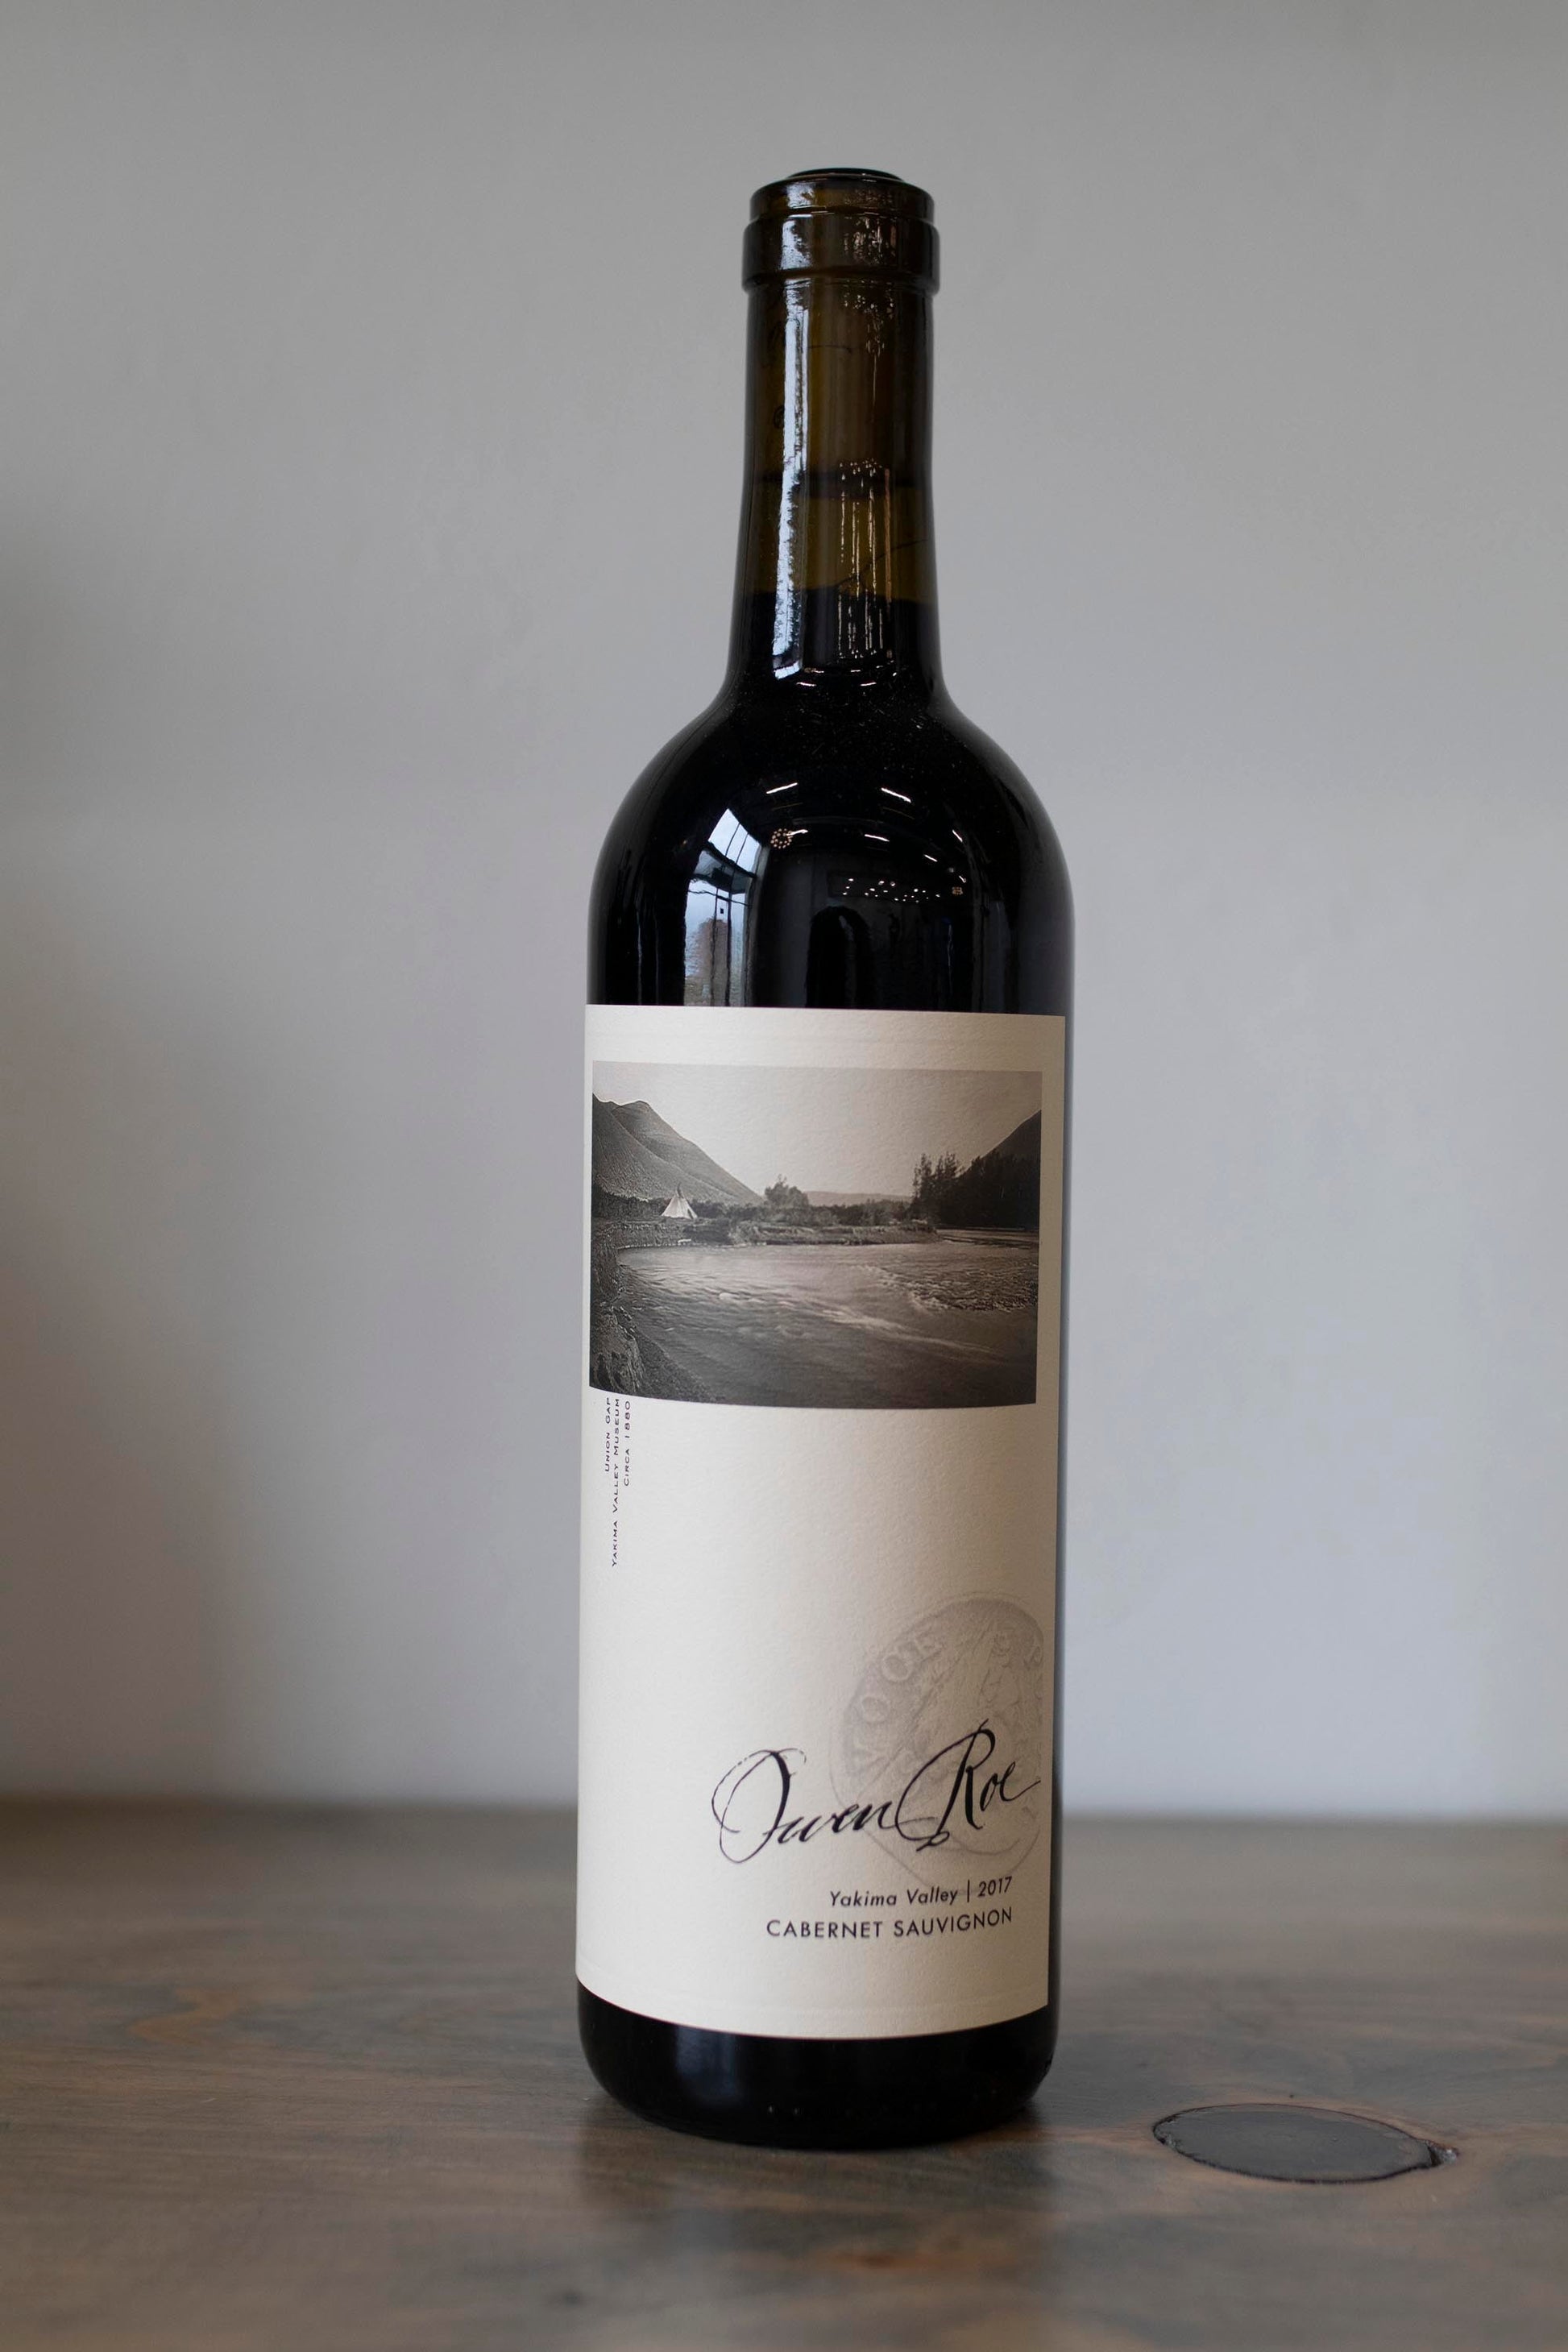 Bottle of Owen Roe Cabernet Sauvignon found at Vine & Board in 3809 NW 166th St Suite 1, Edmond, OK 73012